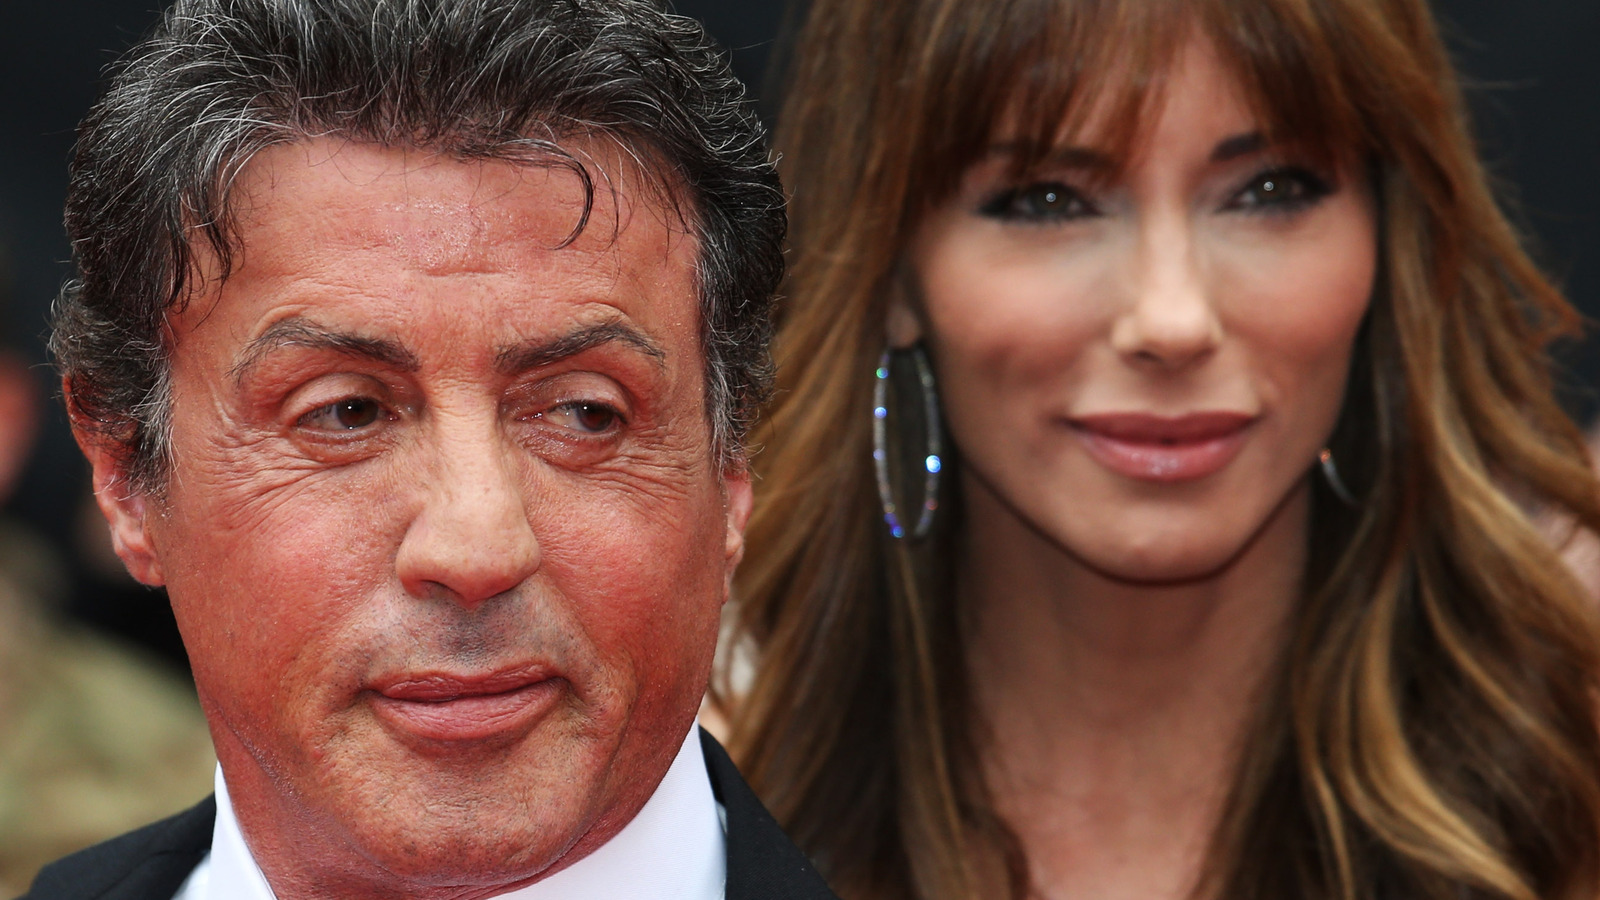 What's Really Going On With Sylvester Stallone's Marriage?